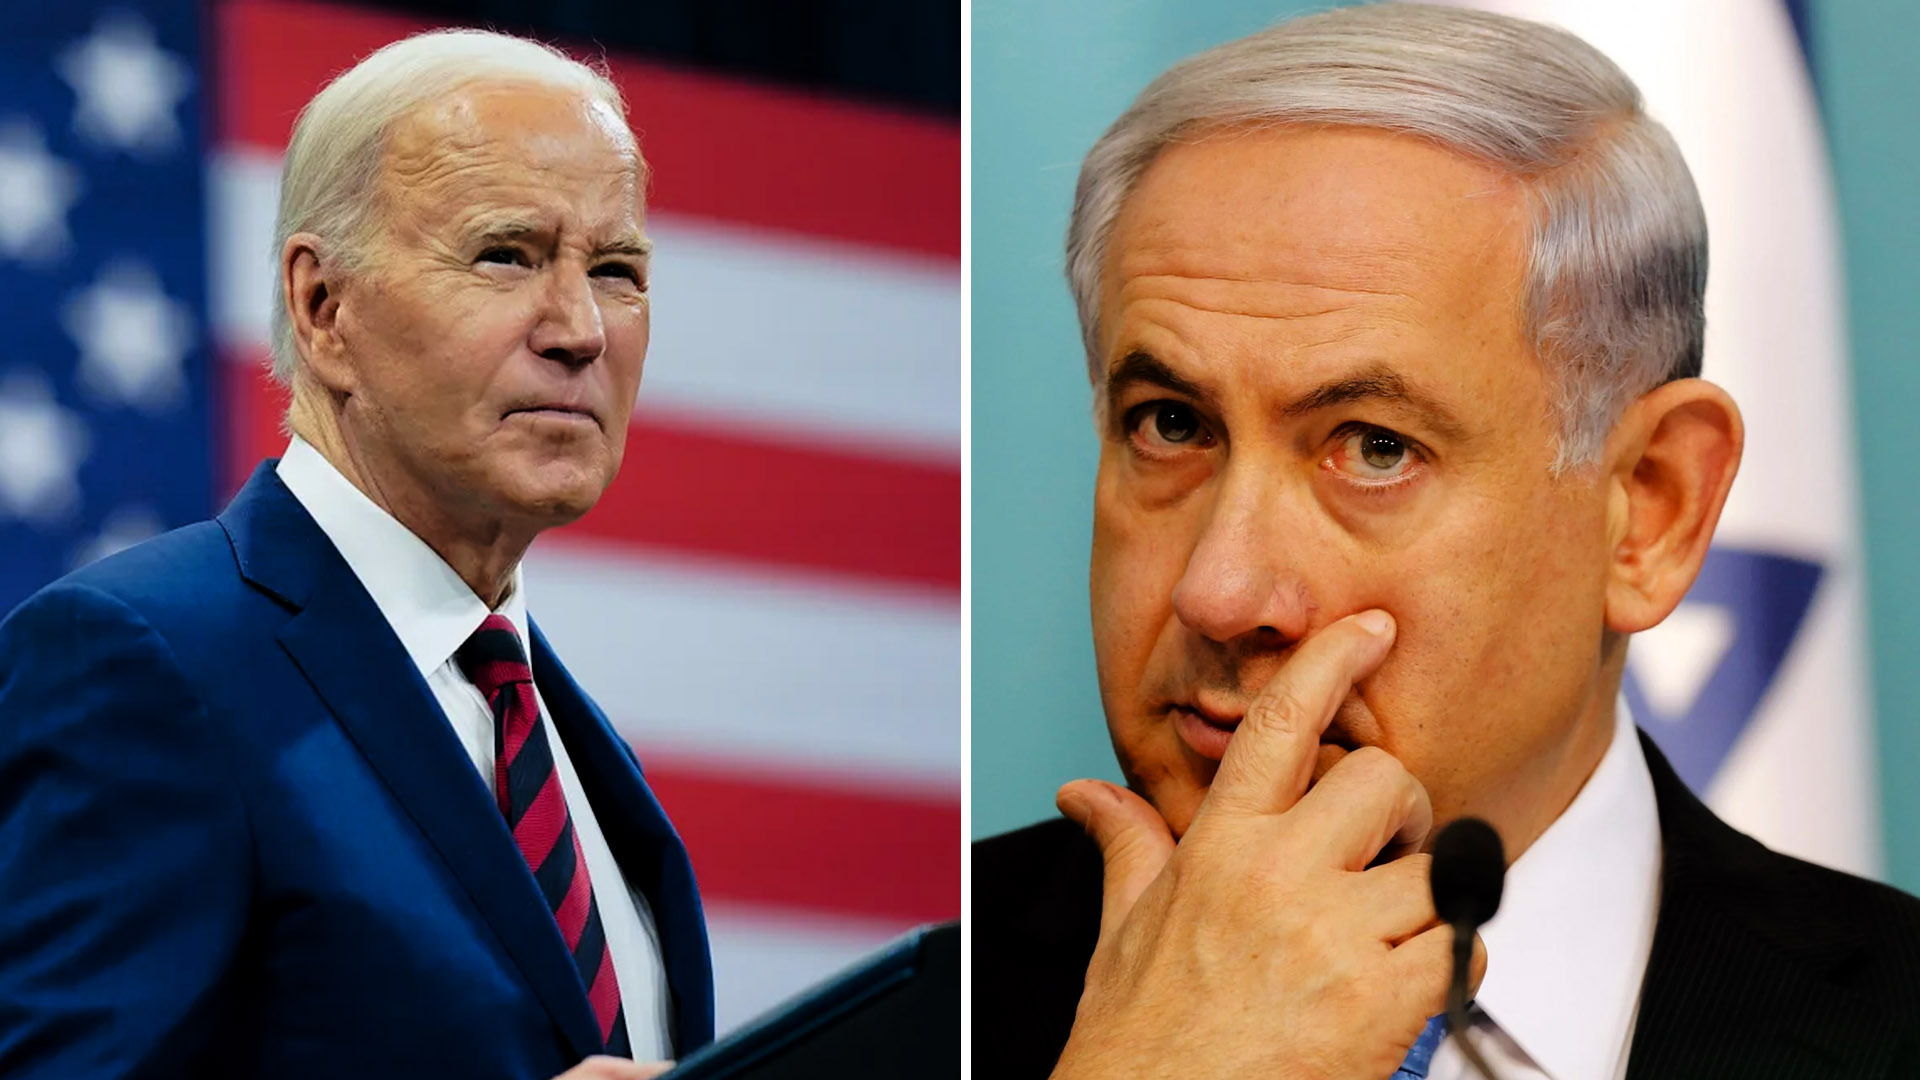 The cracks are deepening in the US-Israel alliance | TV Shows